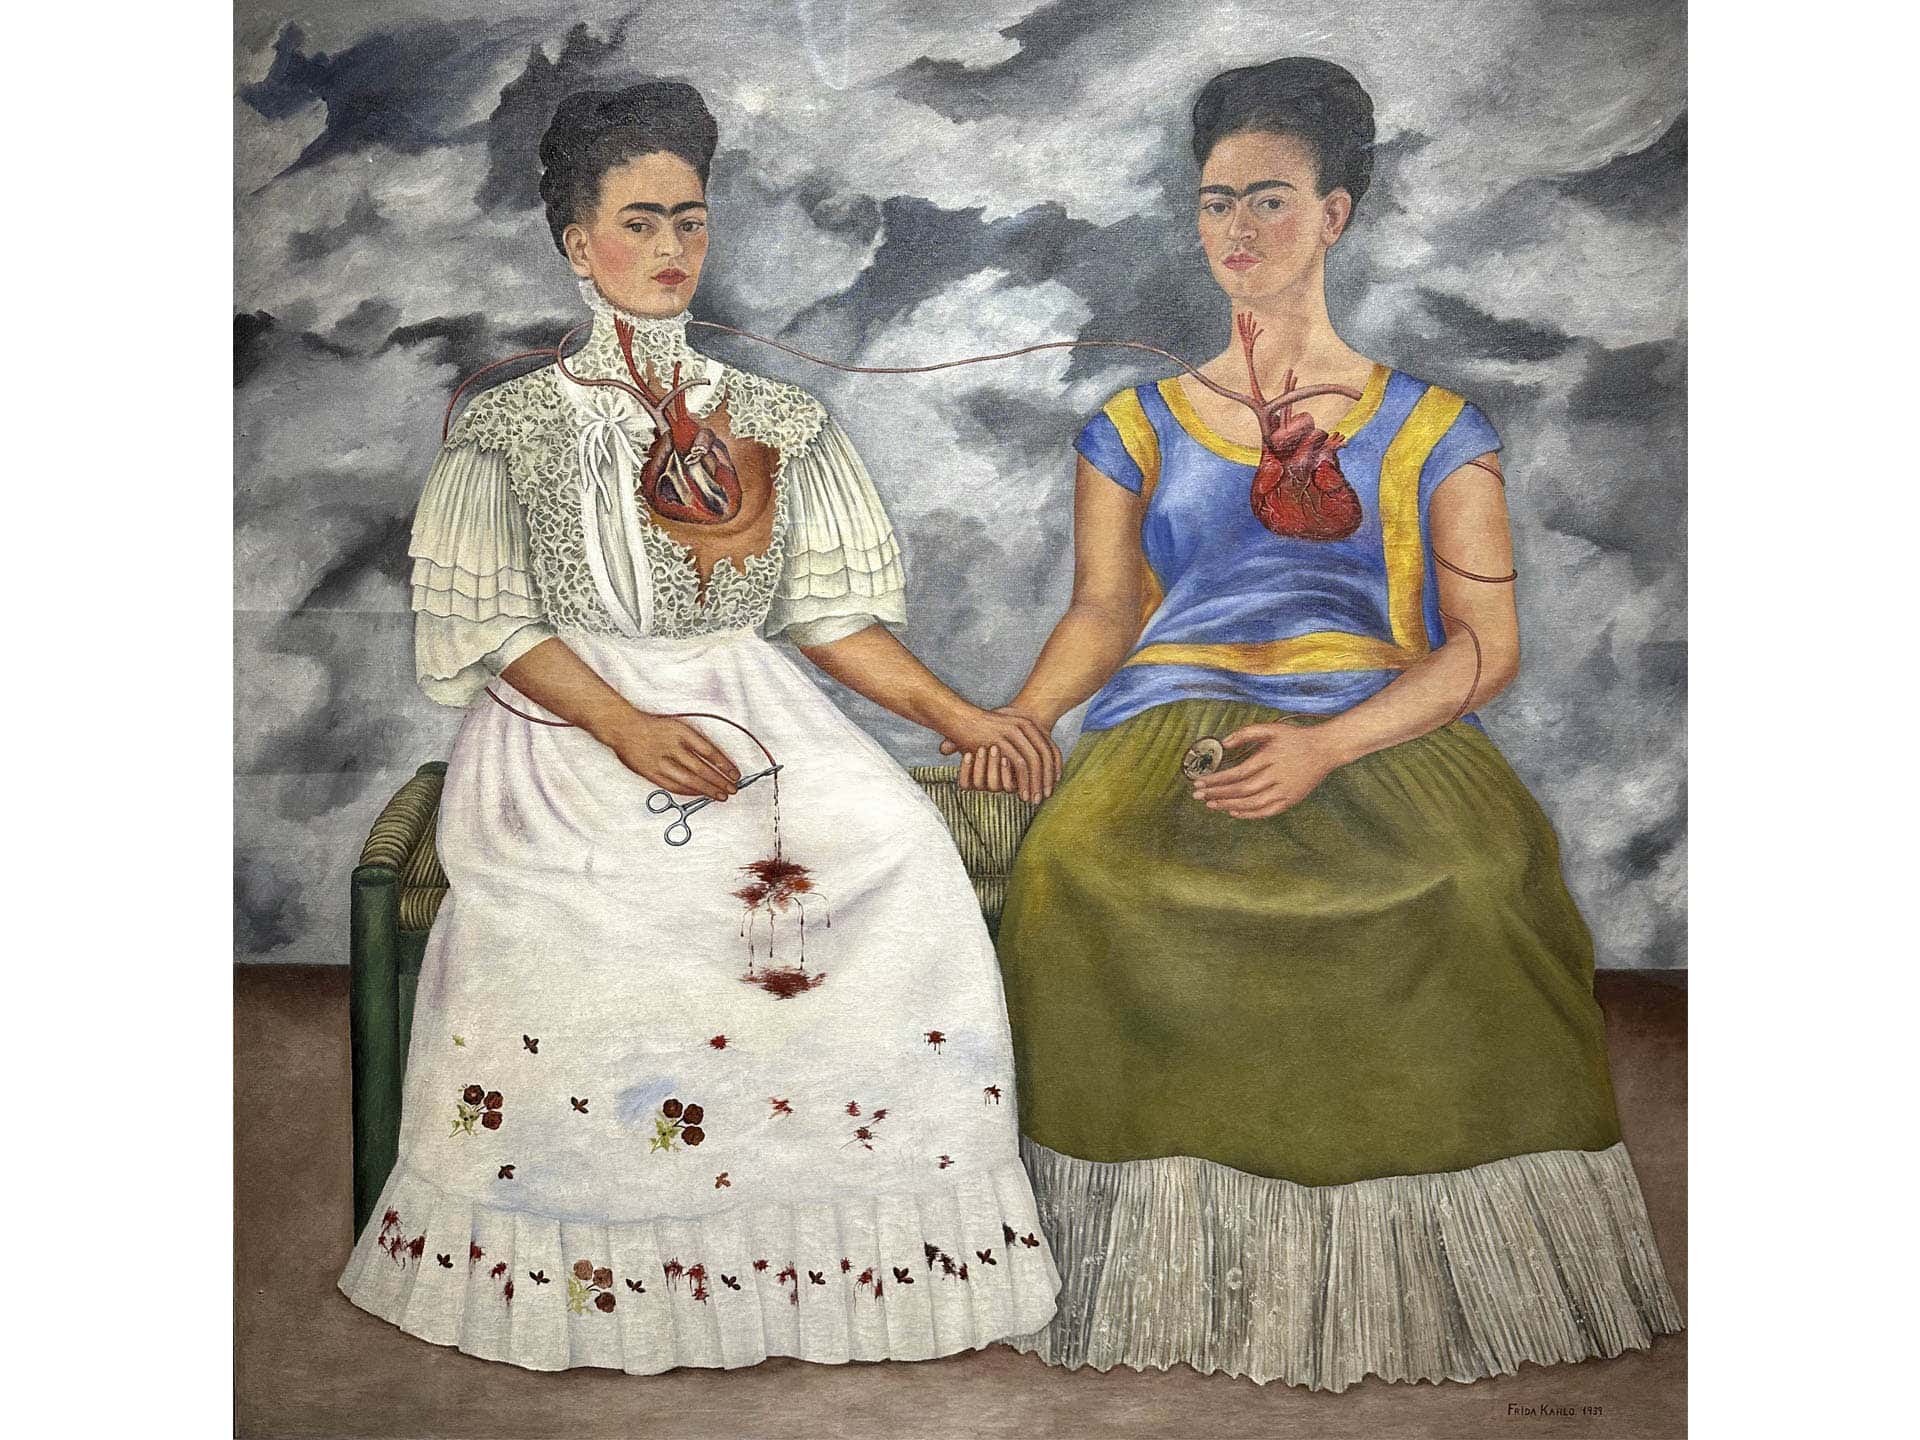 "The Two Fridas", 1939, 1.74 m X 1.73 m, oil on canvas, Museo de Arte Moderno in Mexico City, A divided woman: heroic flamboyance conflicted with inner darkness, femininity contrasted with androgyny, the victim and the martyr